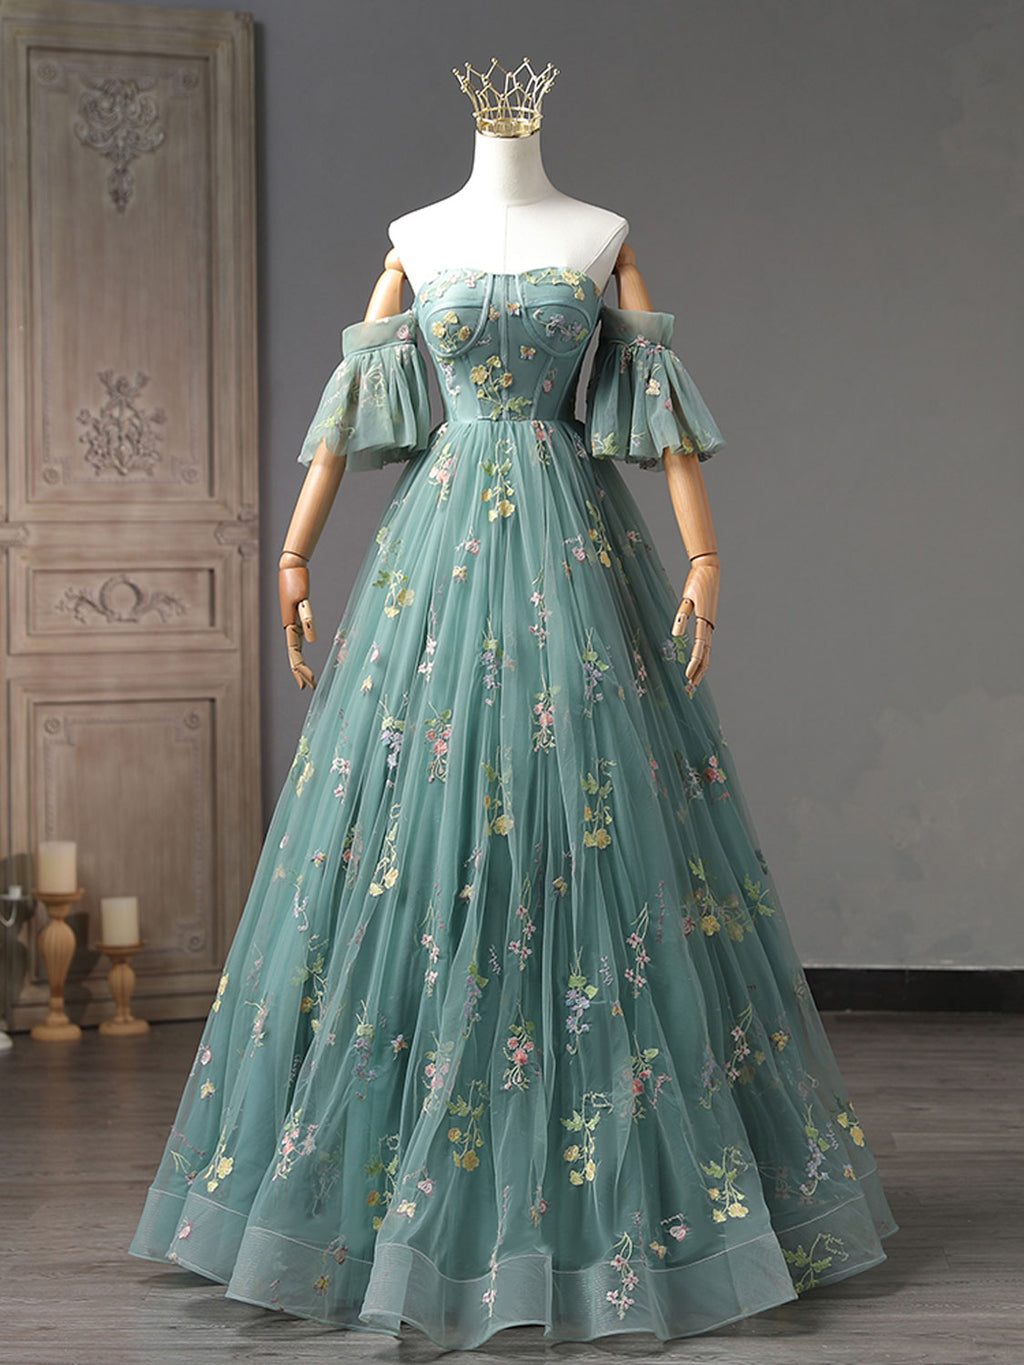 A-Line Sweetheart Neck Green Long Prom Dresses, Green Lace Formal Dress